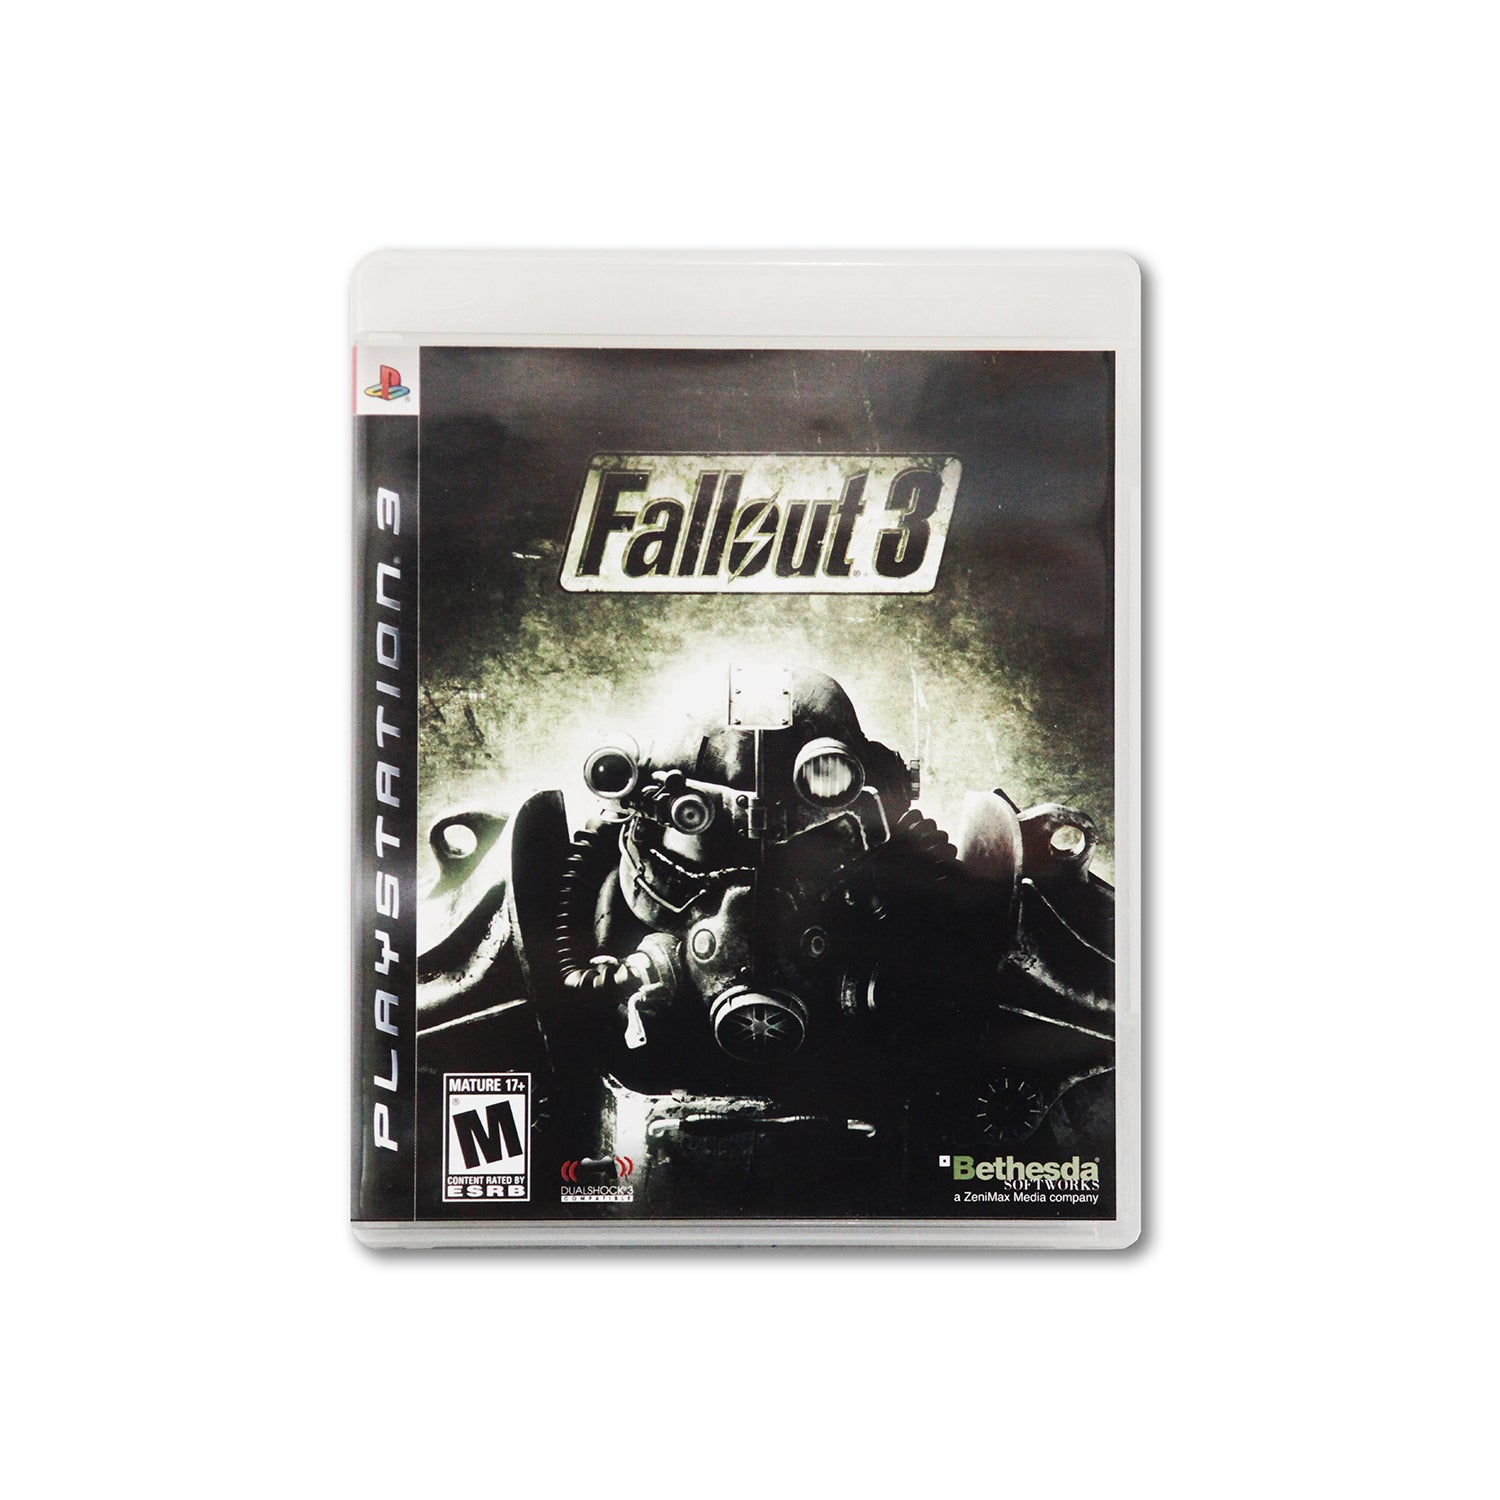 PS3 Fallout 3